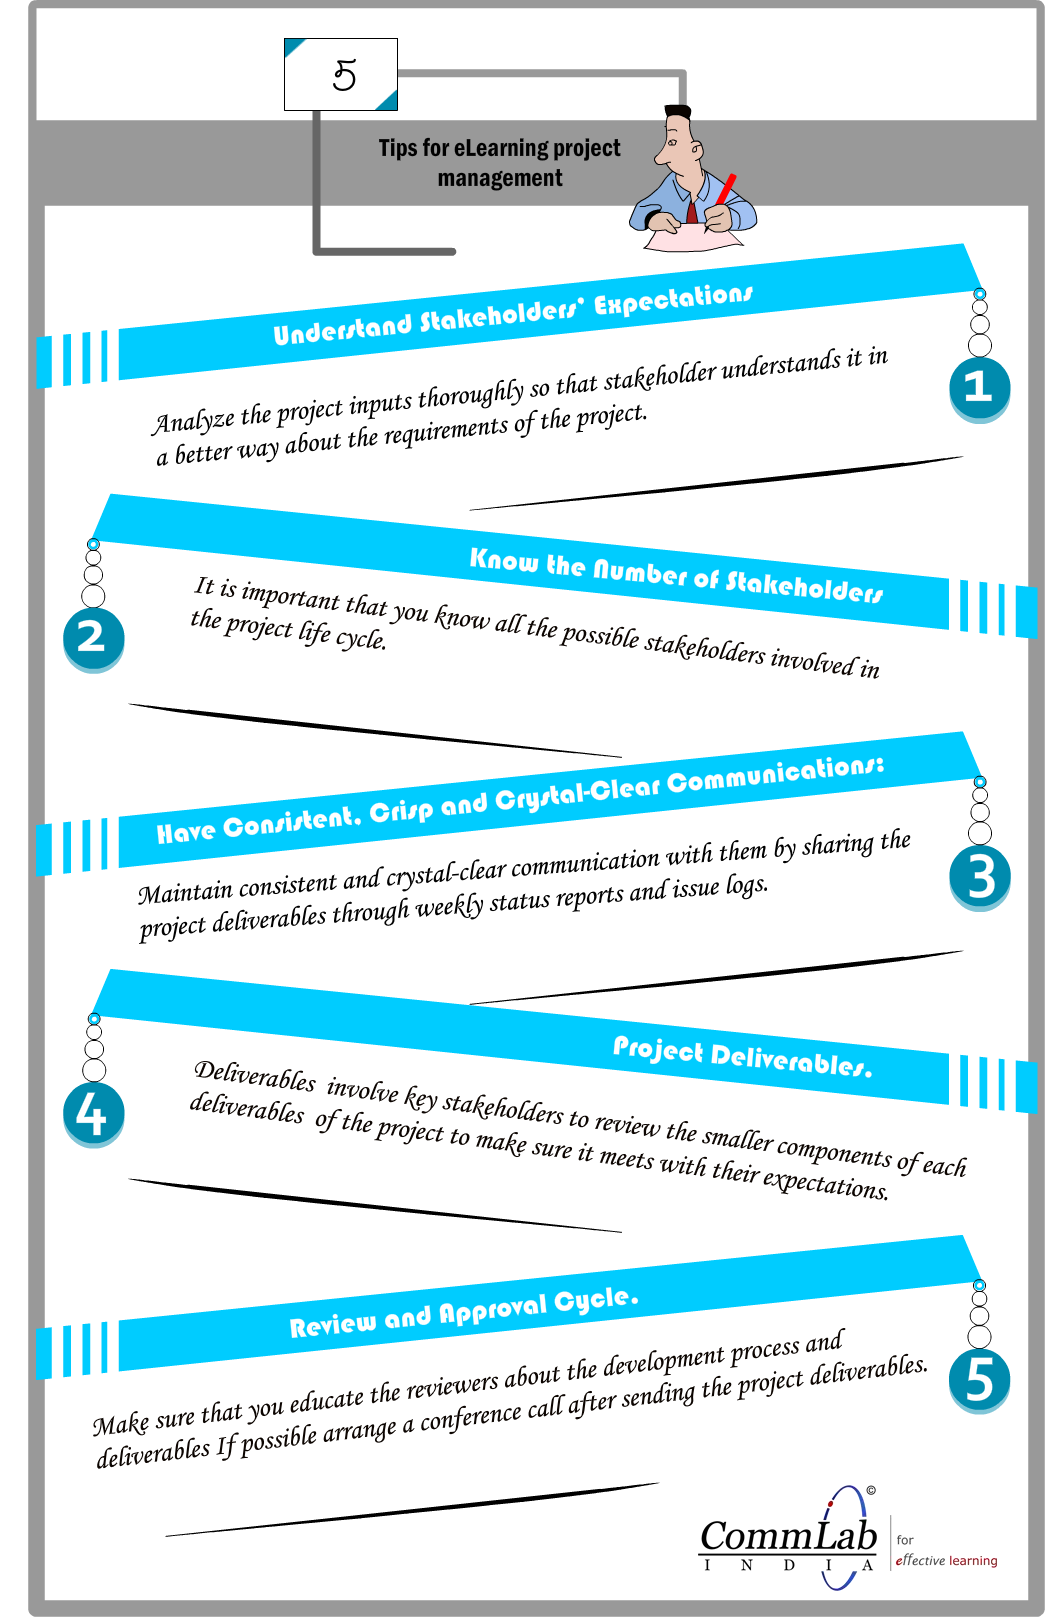 5 Tips for E-learning Project Management – An Infographic